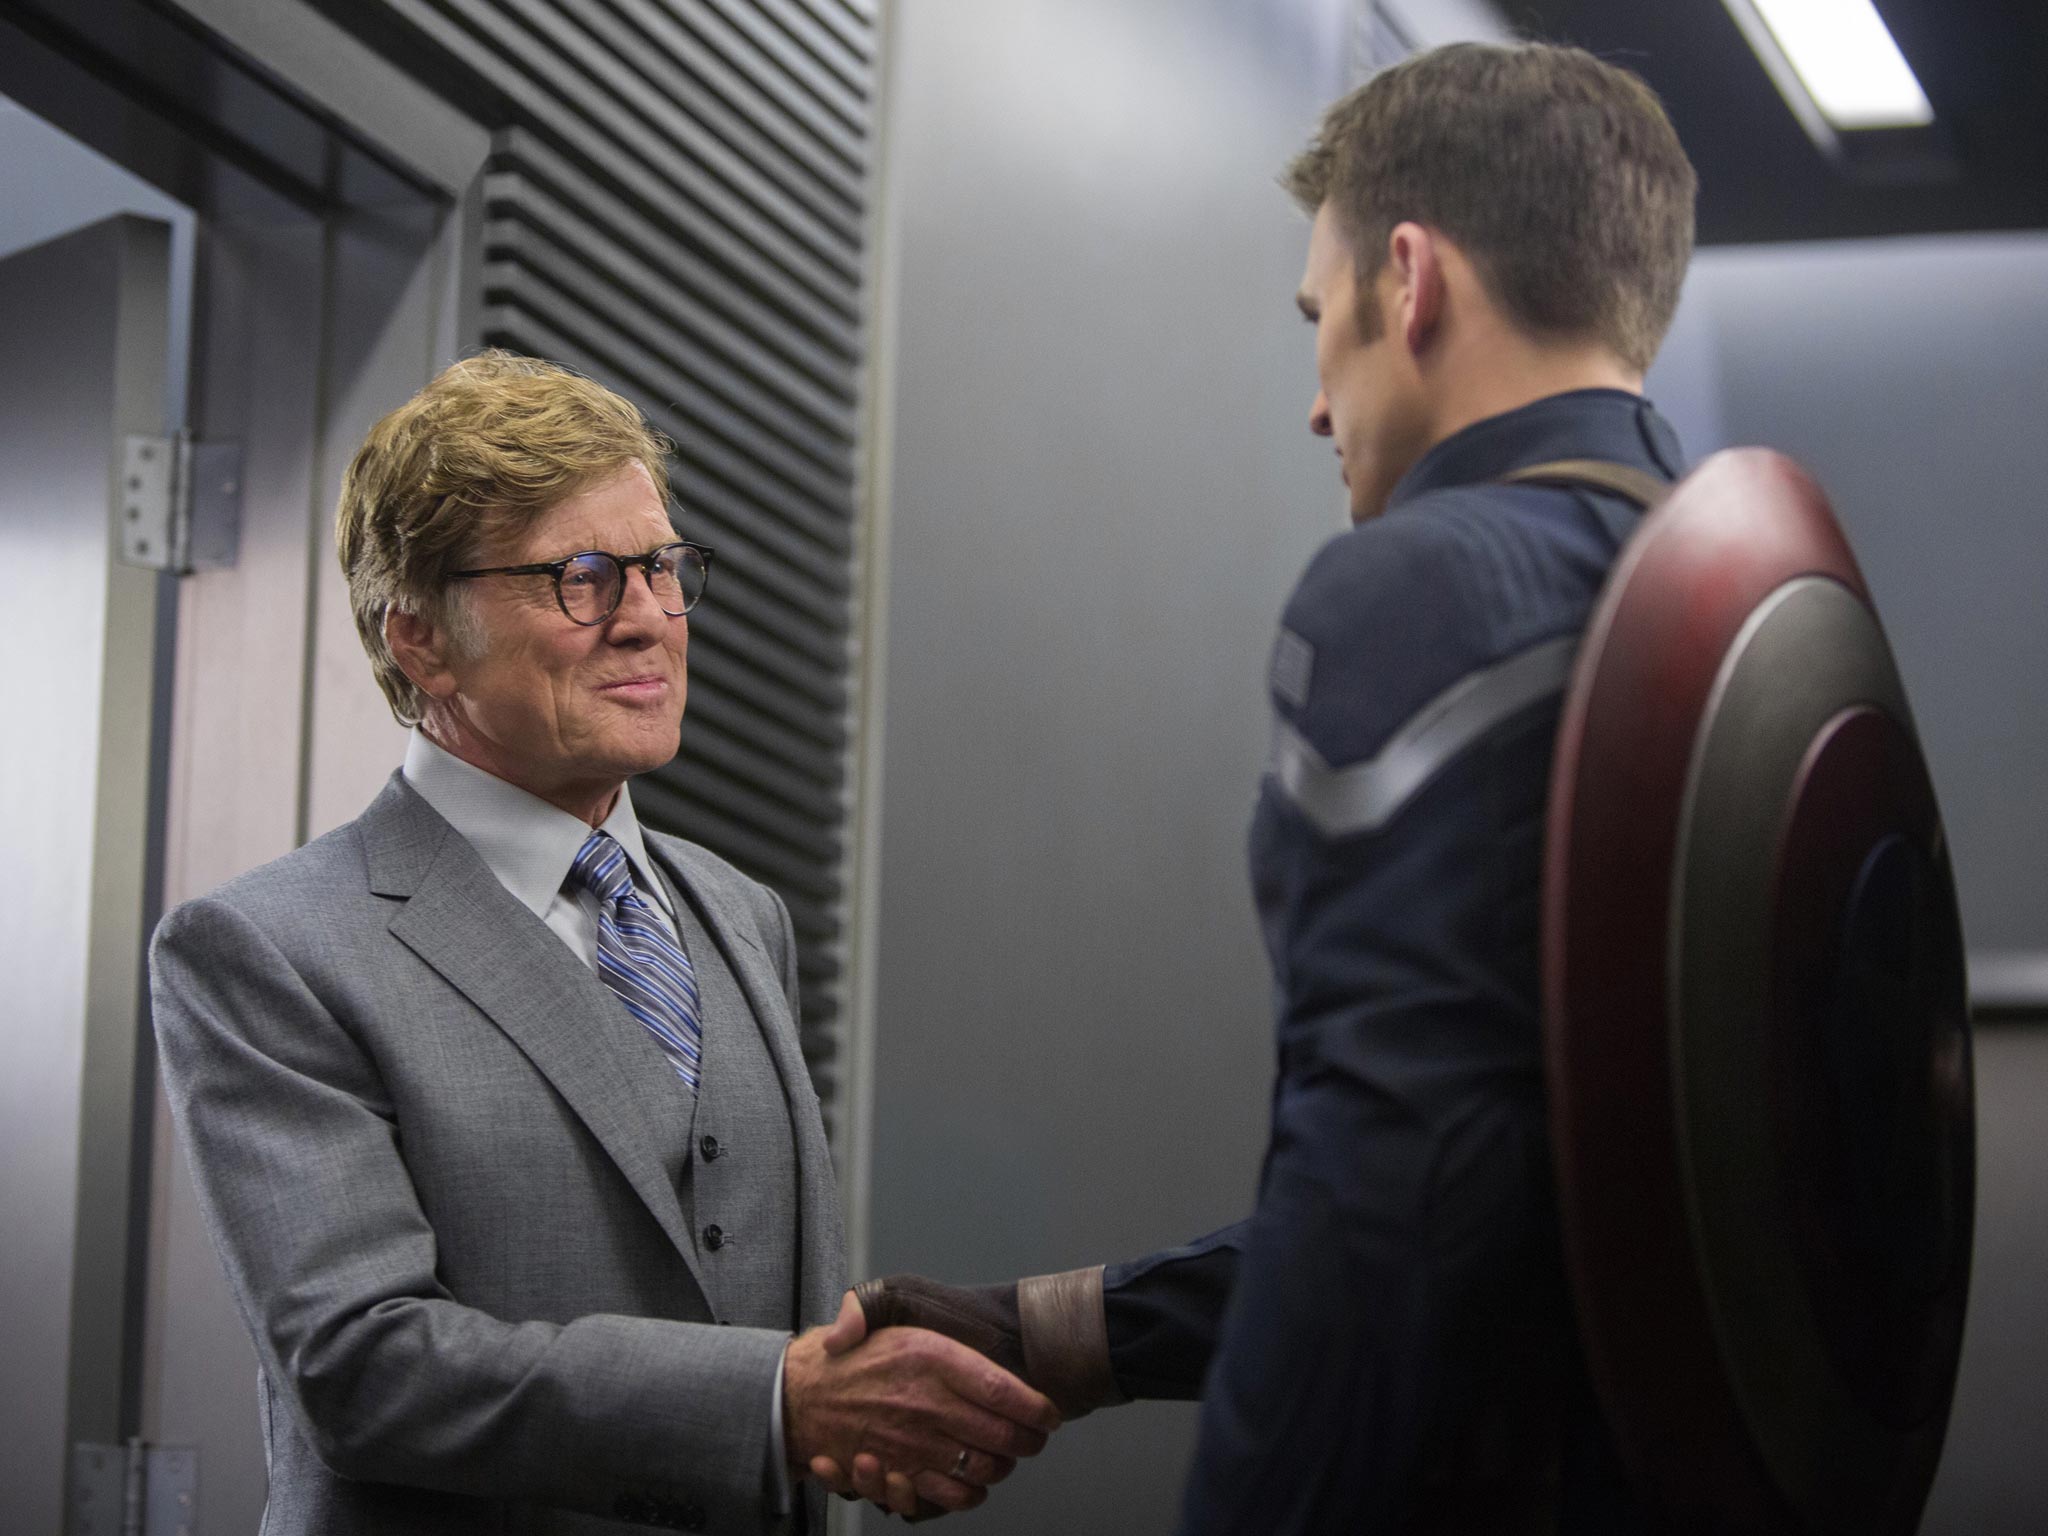 Robert Redford (left) and Chris Evans in a scene from "Captain America: The Winter Soldier"